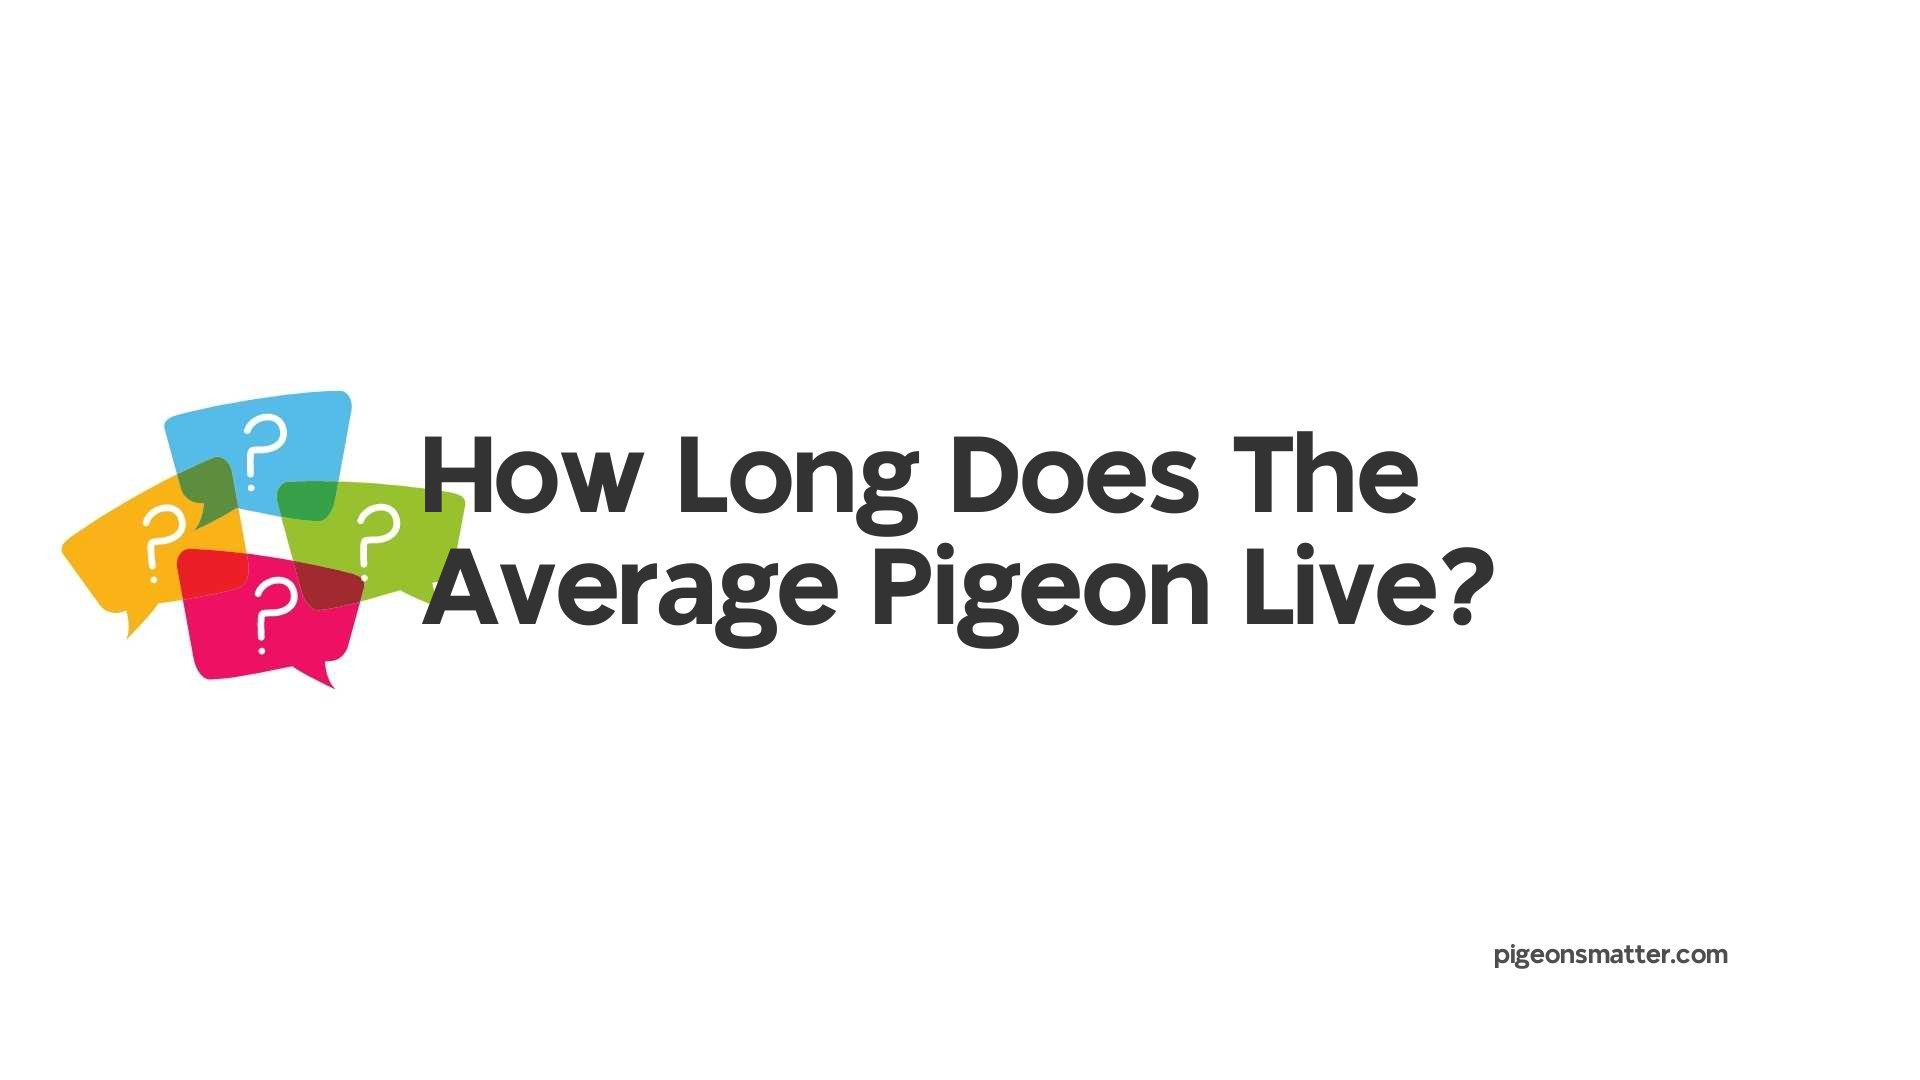 How Long Does The Average Pigeon Live?